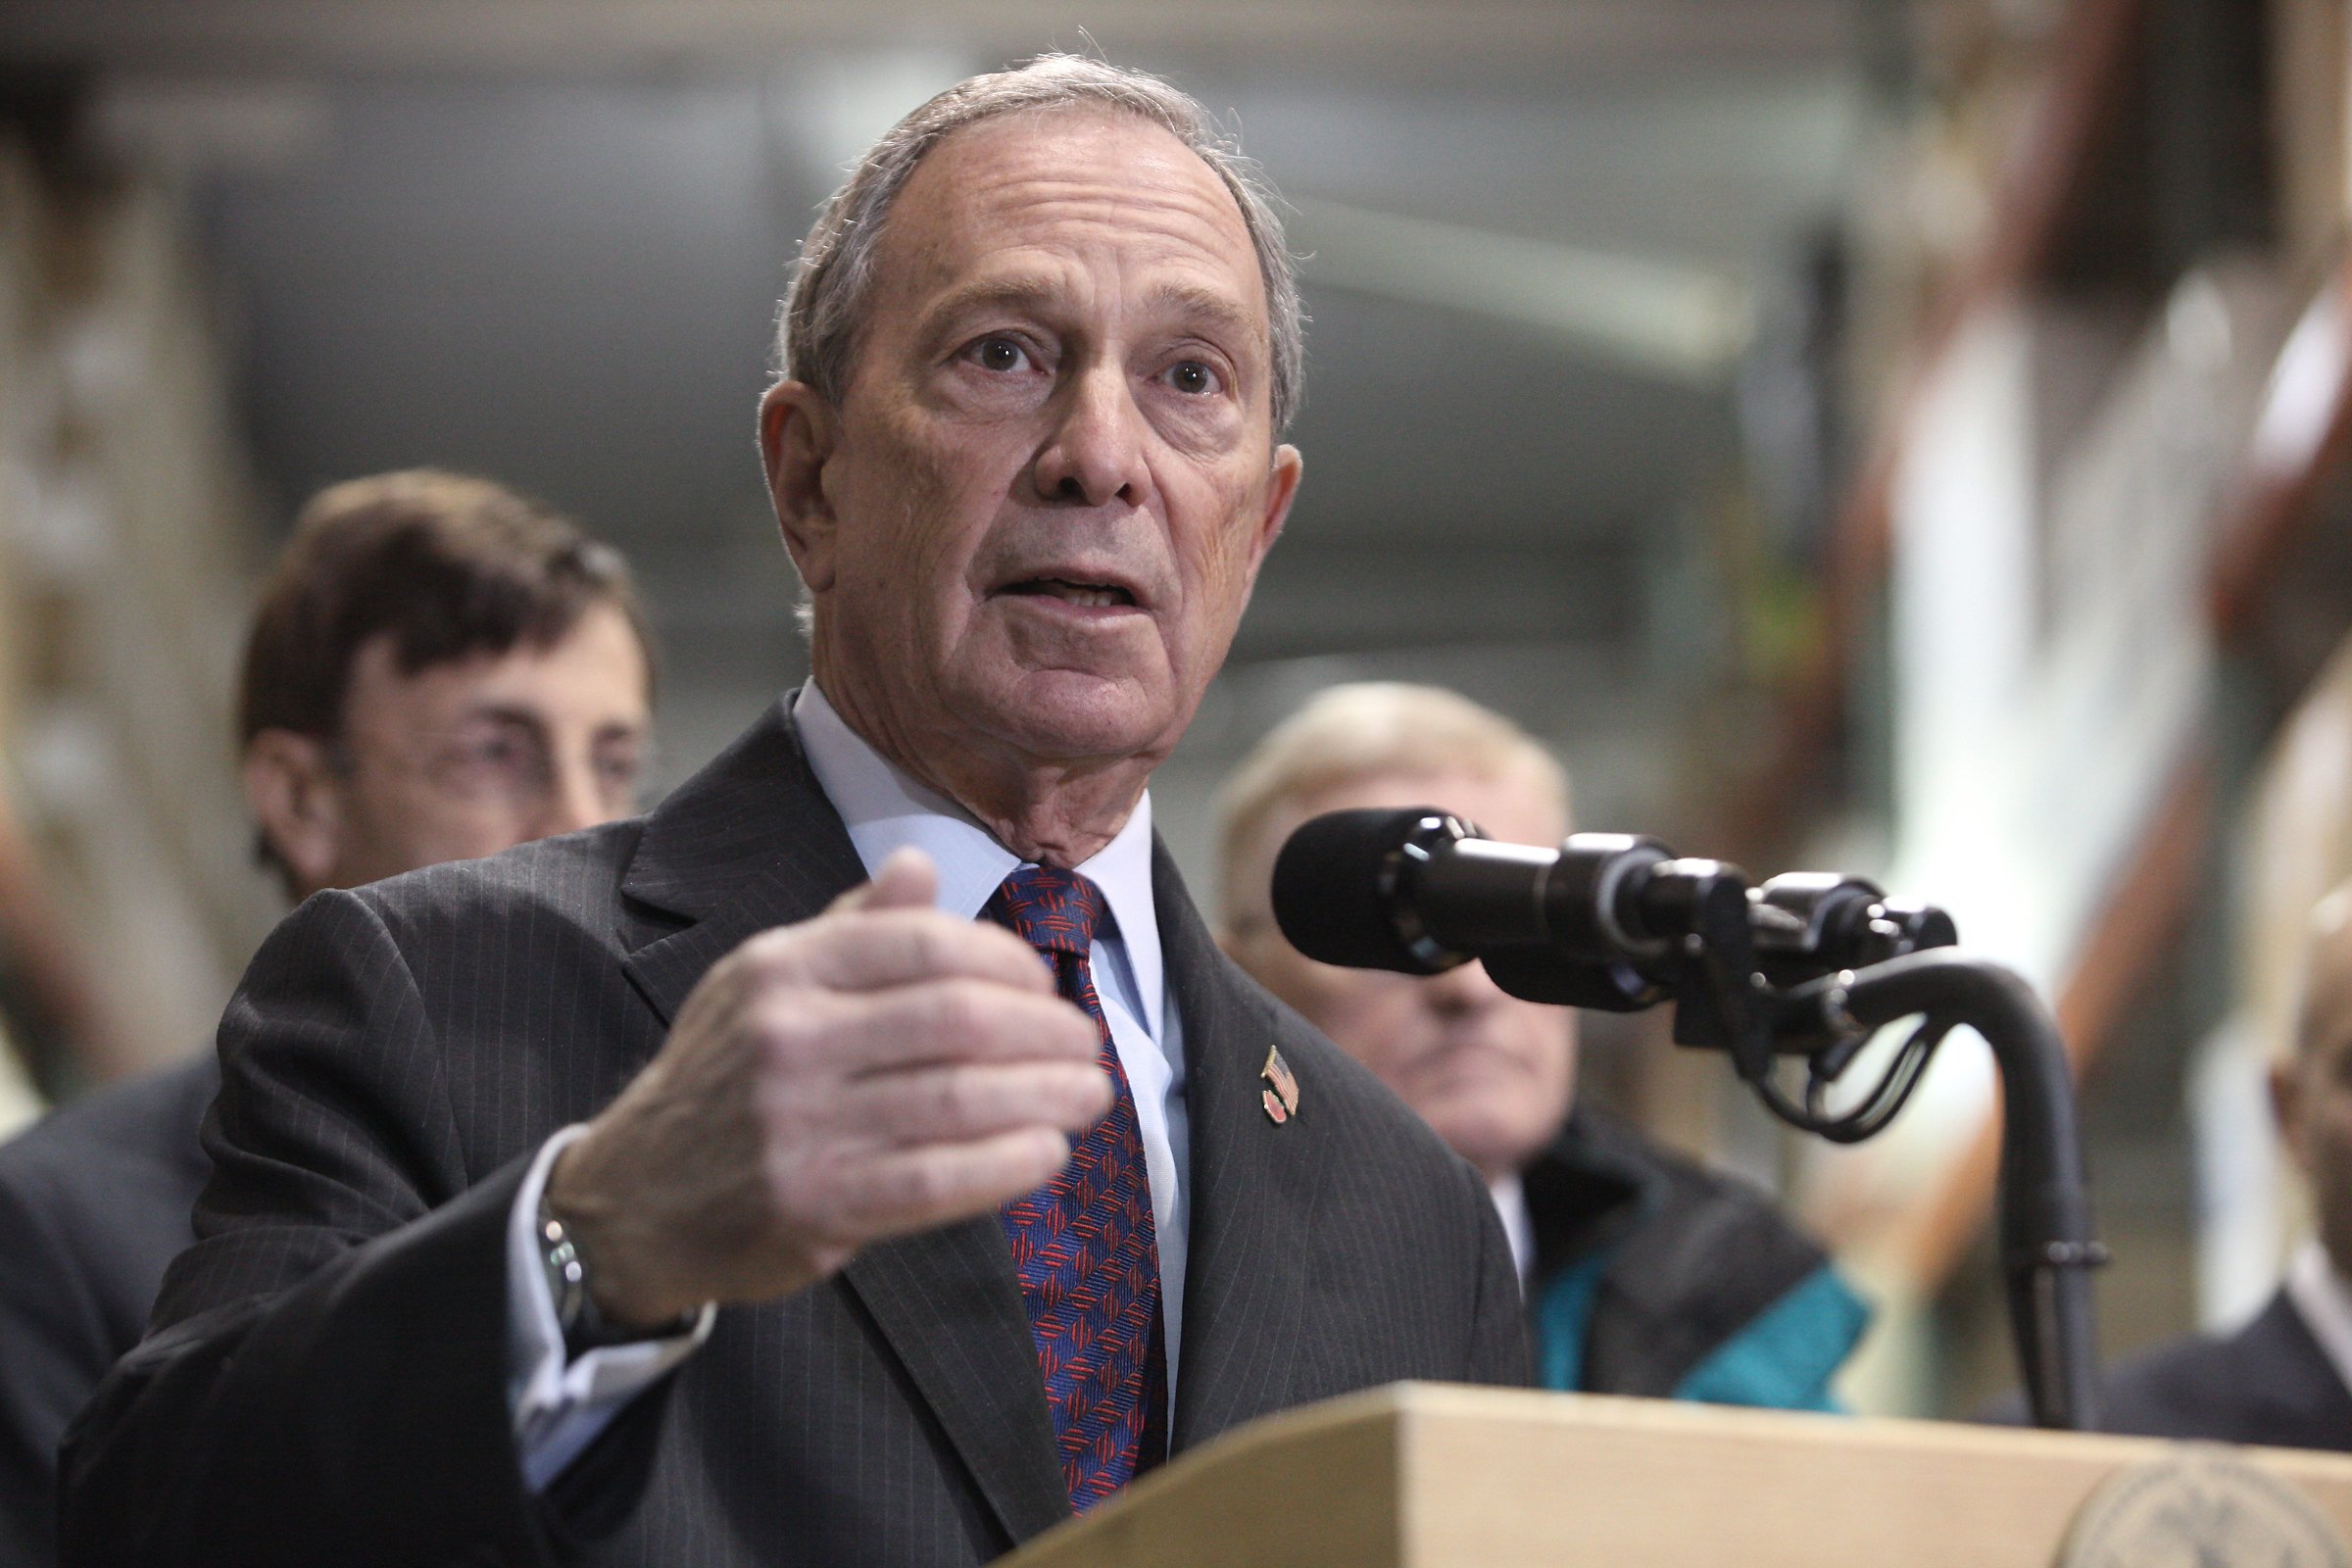  Mayor Michael Bloomberg held a press conference at F&F Hardware and Paint discussing the status of the blizzard and plowing progress. 